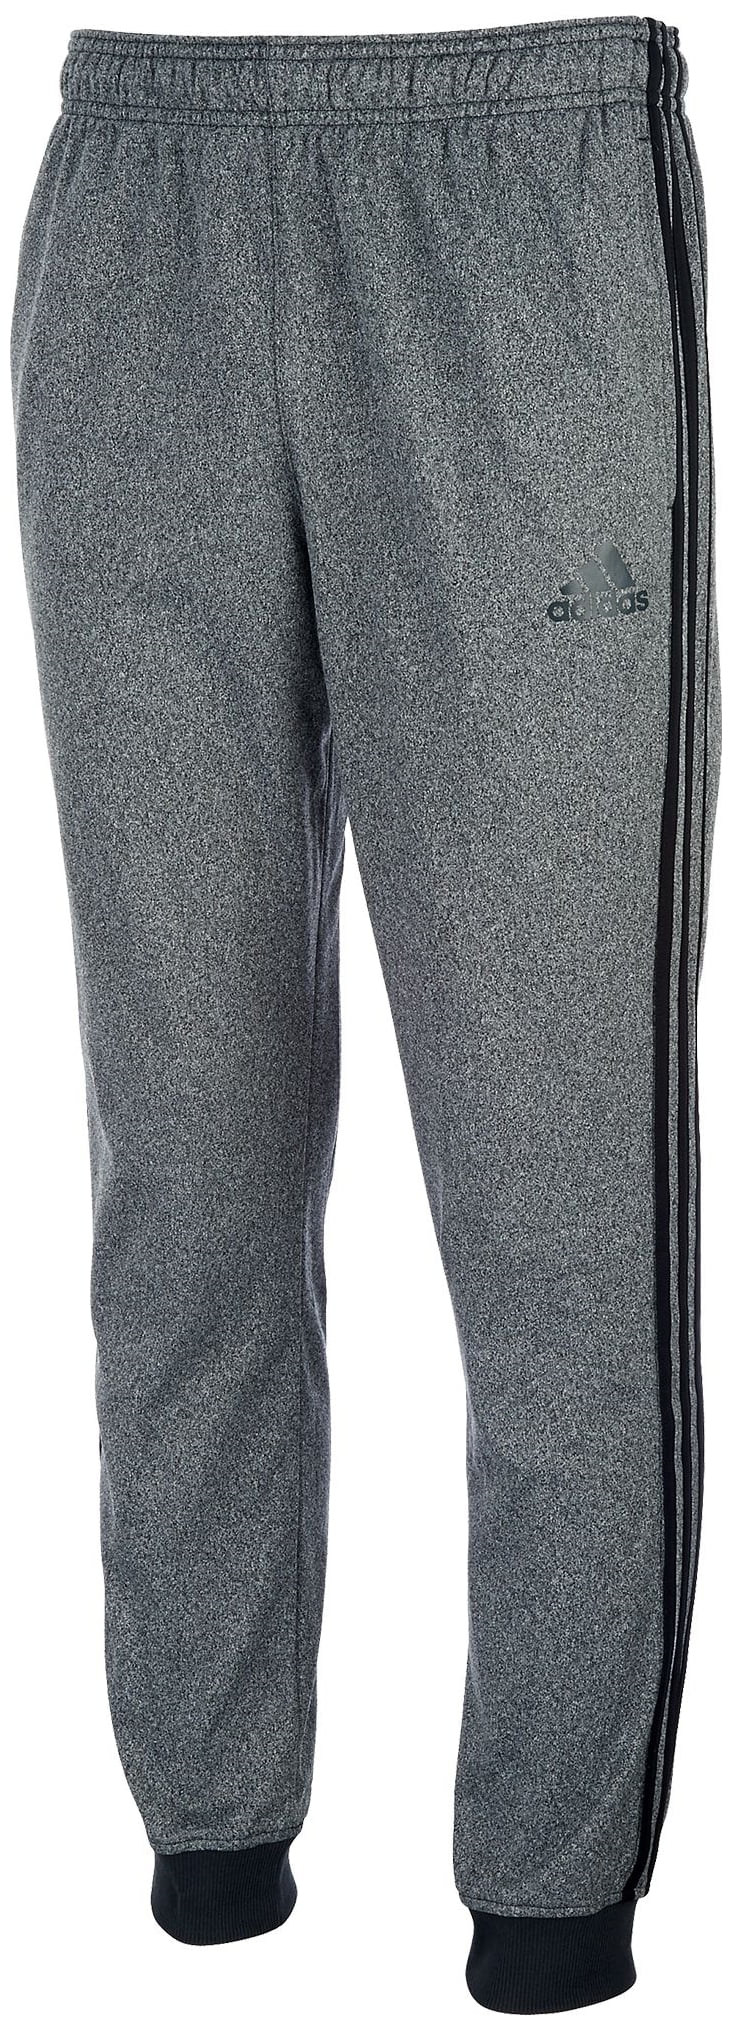 adidas men's essential tricot joggers